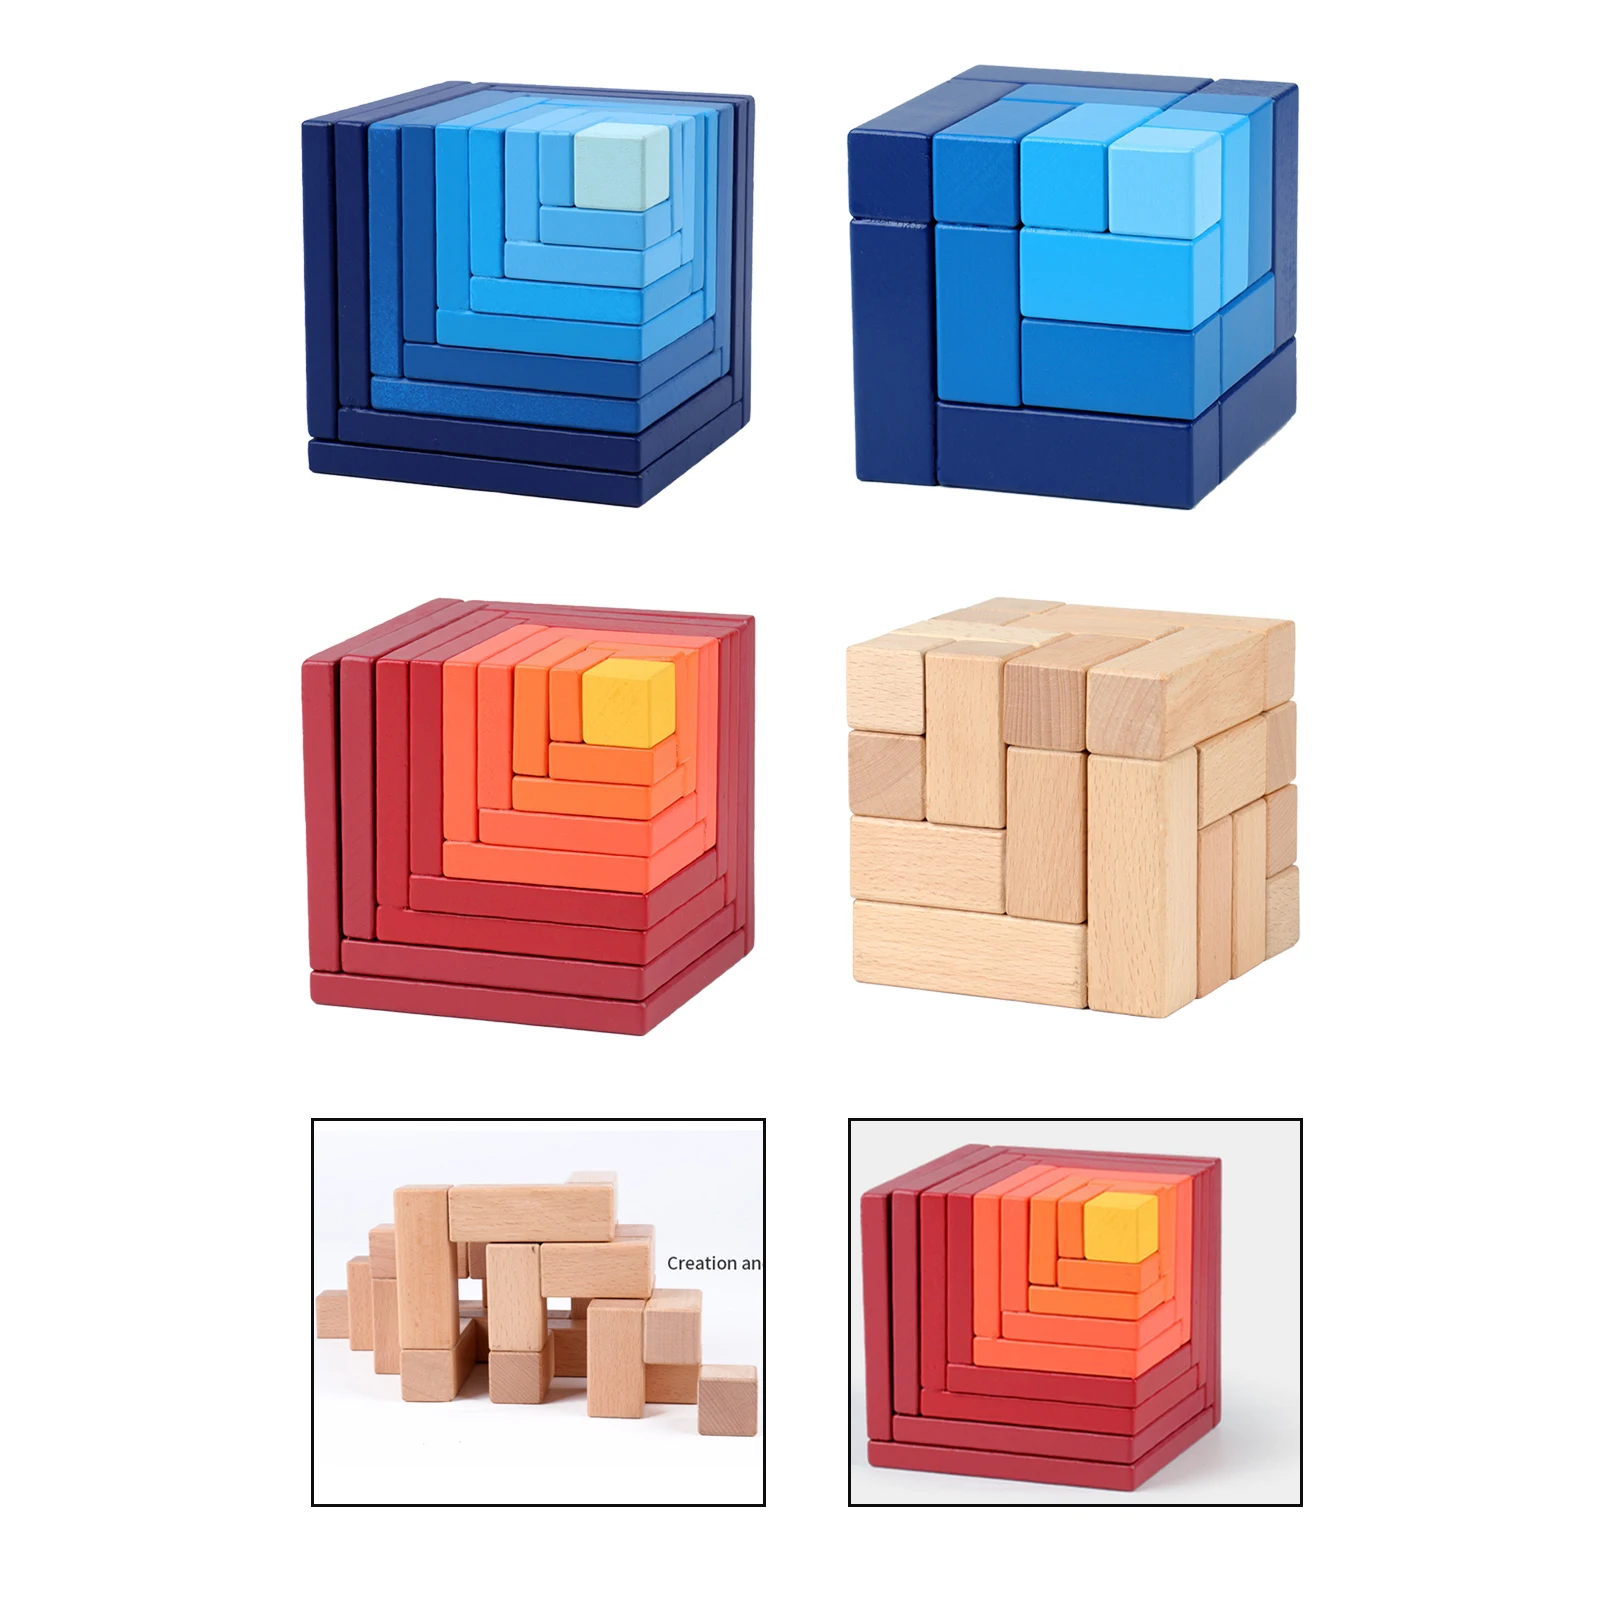 3D Puzzle Cubes Building Blocks Educational Bricks Stress Relief Travel Games Toy for Kids Adult